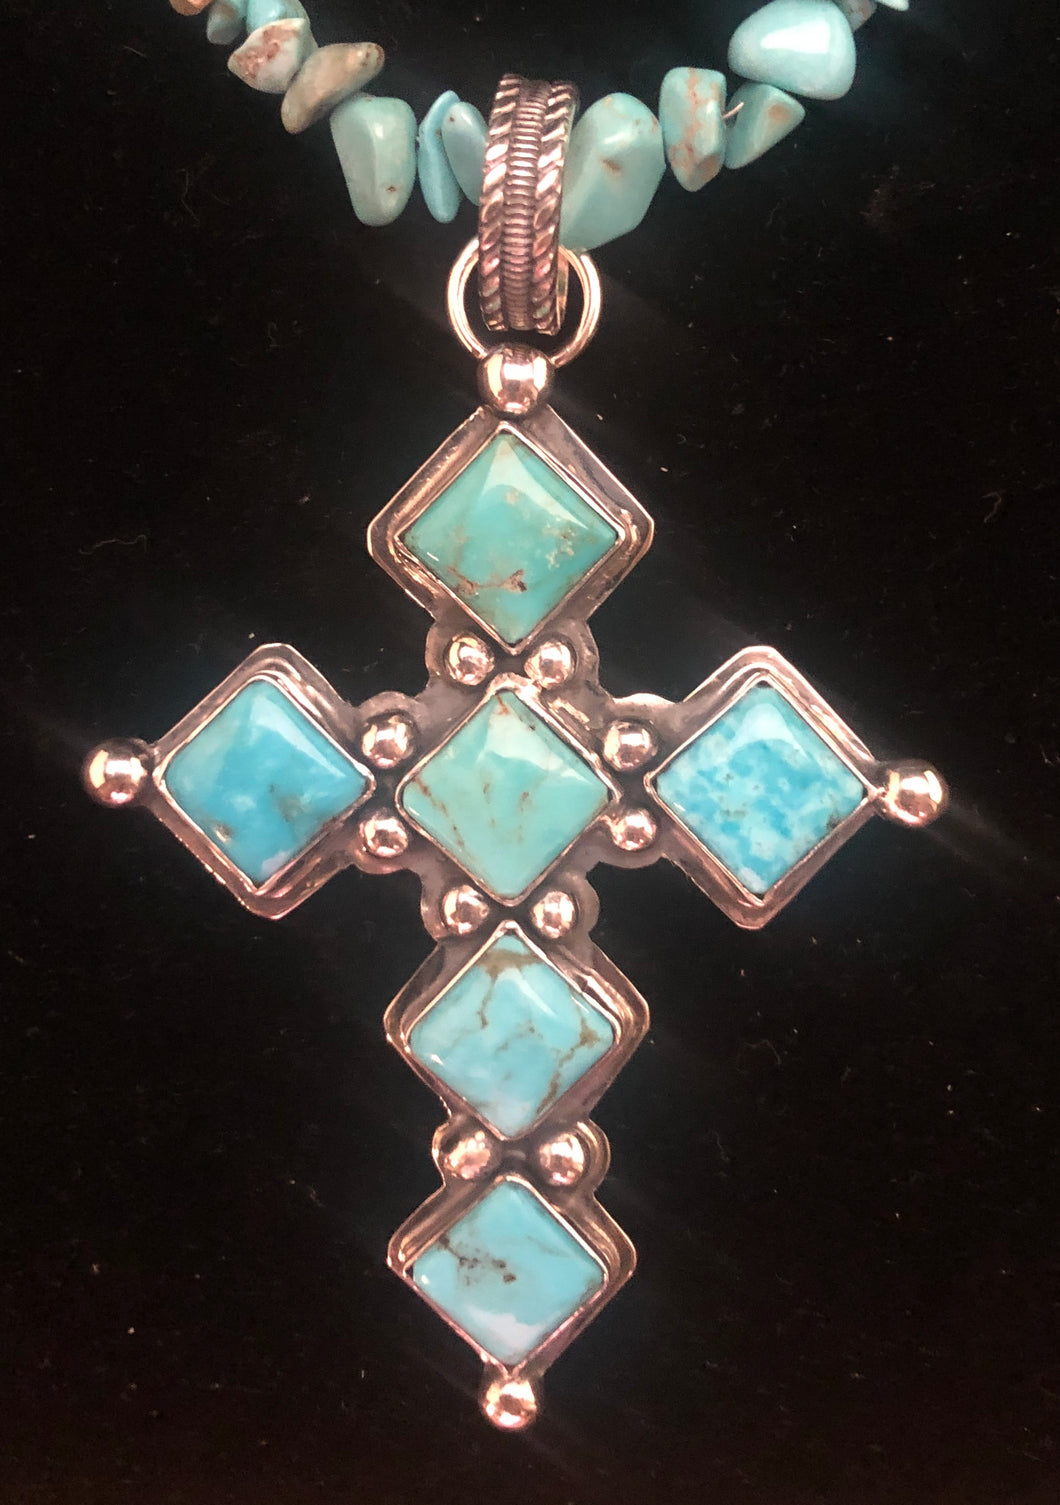 Turquoise Sterling Silver Cross Necklace Pendant